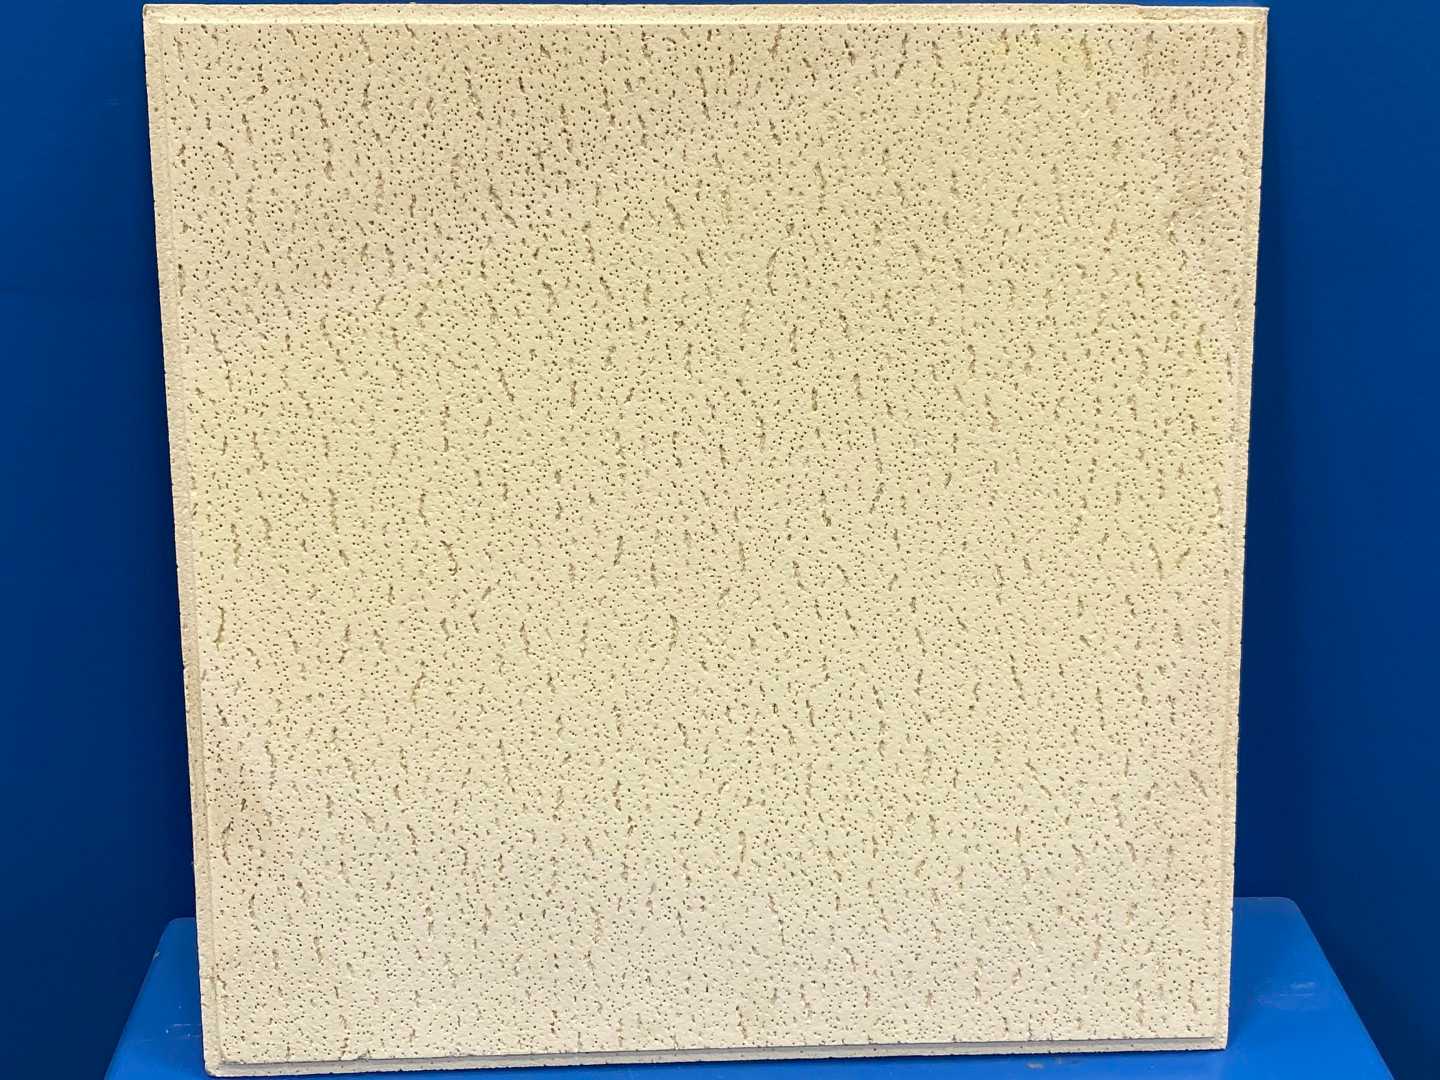 ArmStrong 925C T Ceiling Tiles 24"x24"x5/8" (16 pieces per box) Covers 64 Sq Ft